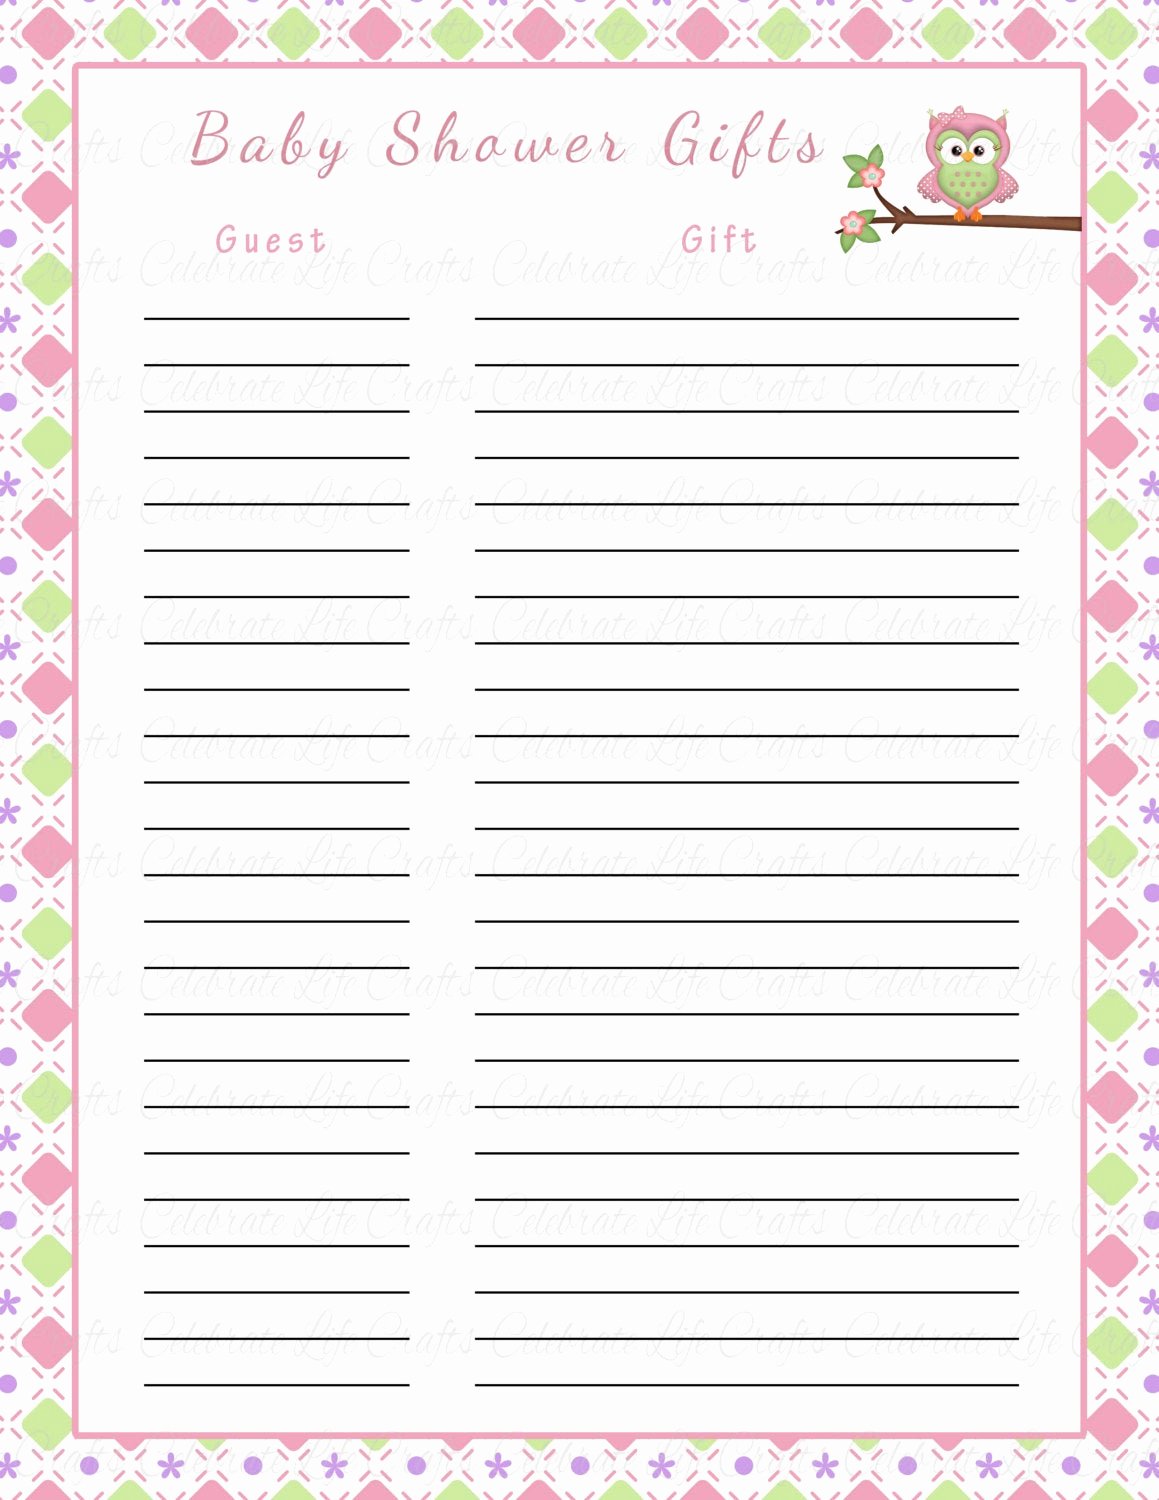 Baby Shower Gift Lists Elegant Baby Shower Gift List Printable Baby by Celebratelifecrafts